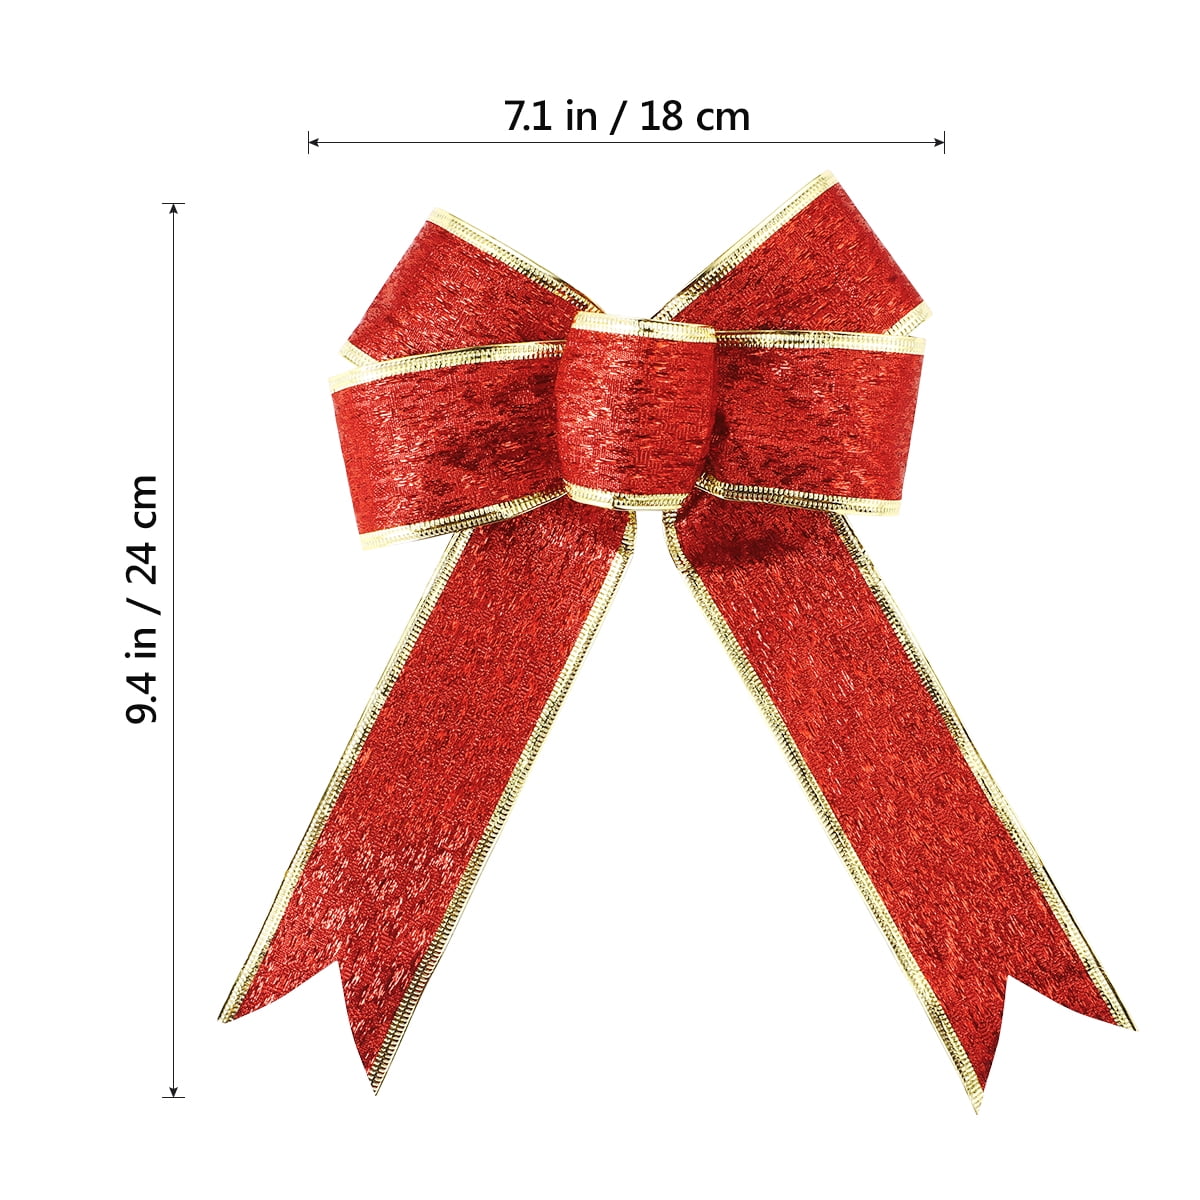 Homemaxs 5pcs/pack Glittering Fabric Christmas Ribbon Bow Gift Knot Ribbon Ornaments for Christmas Tree Presents Decoration(Red), Size: 9.84×6.69×0.59